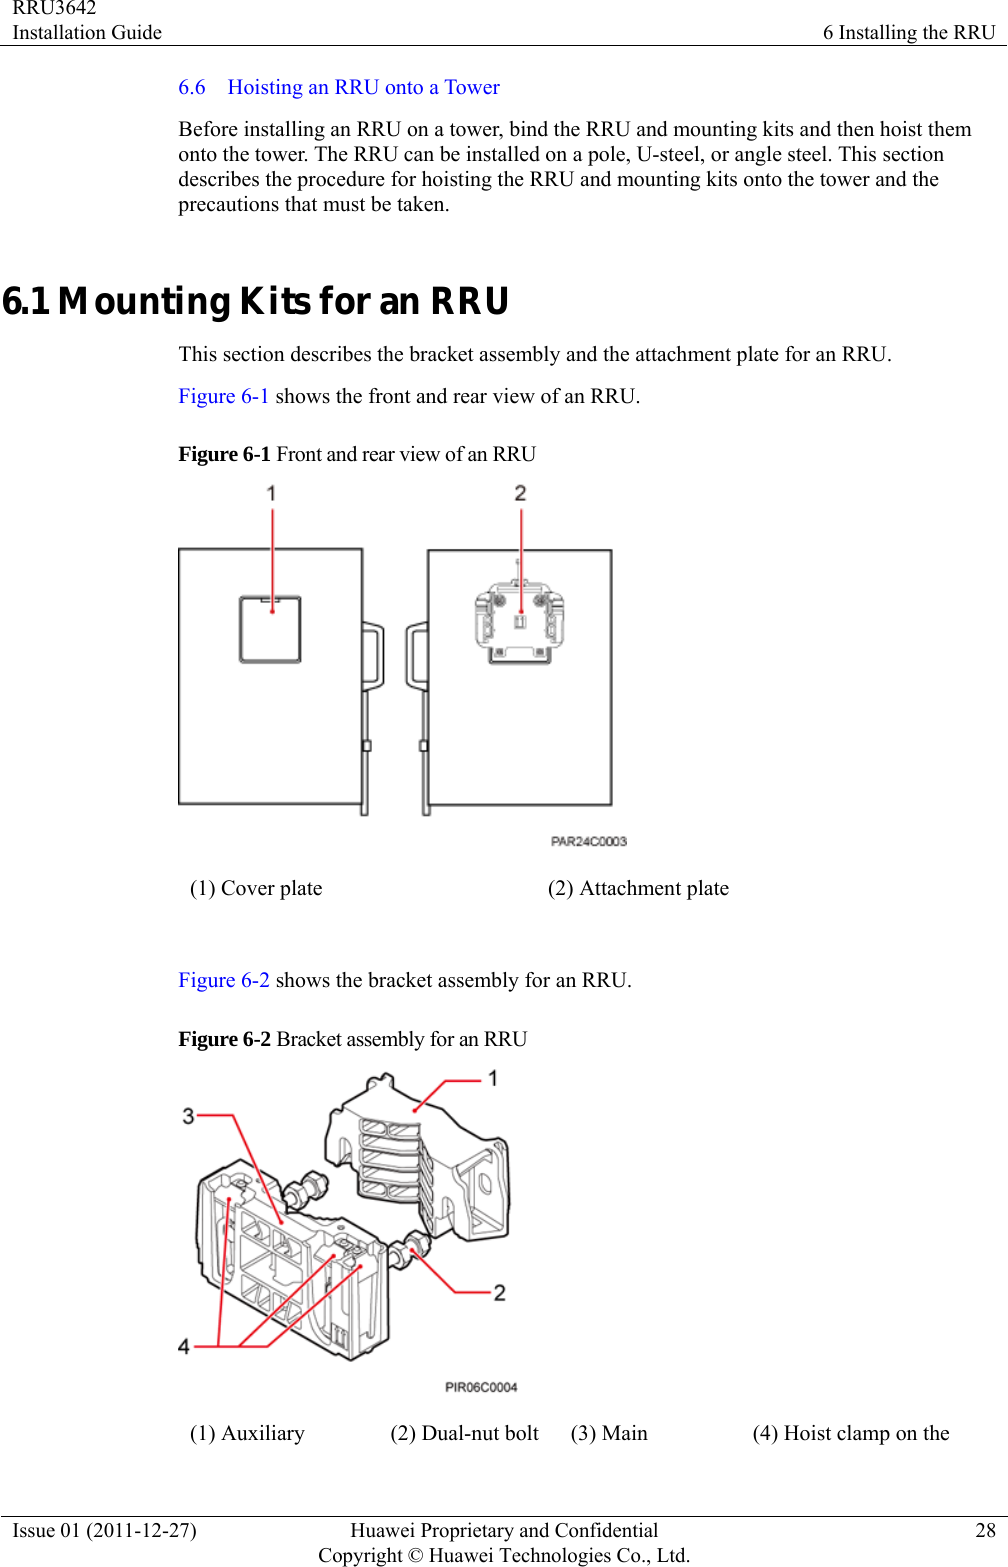 RRU3642 Installation Guide  6 Installing the RRU Issue 01 (2011-12-27)  Huawei Proprietary and Confidential         Copyright © Huawei Technologies Co., Ltd.28 6.6  Hoisting an RRU onto a Tower Before installing an RRU on a tower, bind the RRU and mounting kits and then hoist them onto the tower. The RRU can be installed on a pole, U-steel, or angle steel. This section describes the procedure for hoisting the RRU and mounting kits onto the tower and the precautions that must be taken. 6.1 Mounting Kits for an RRU This section describes the bracket assembly and the attachment plate for an RRU. Figure 6-1 shows the front and rear view of an RRU. Figure 6-1 Front and rear view of an RRU  (1) Cover plate  (2) Attachment plate  Figure 6-2 shows the bracket assembly for an RRU. Figure 6-2 Bracket assembly for an RRU  (1) Auxiliary  (2) Dual-nut bolt  (3) Main  (4) Hoist clamp on the 